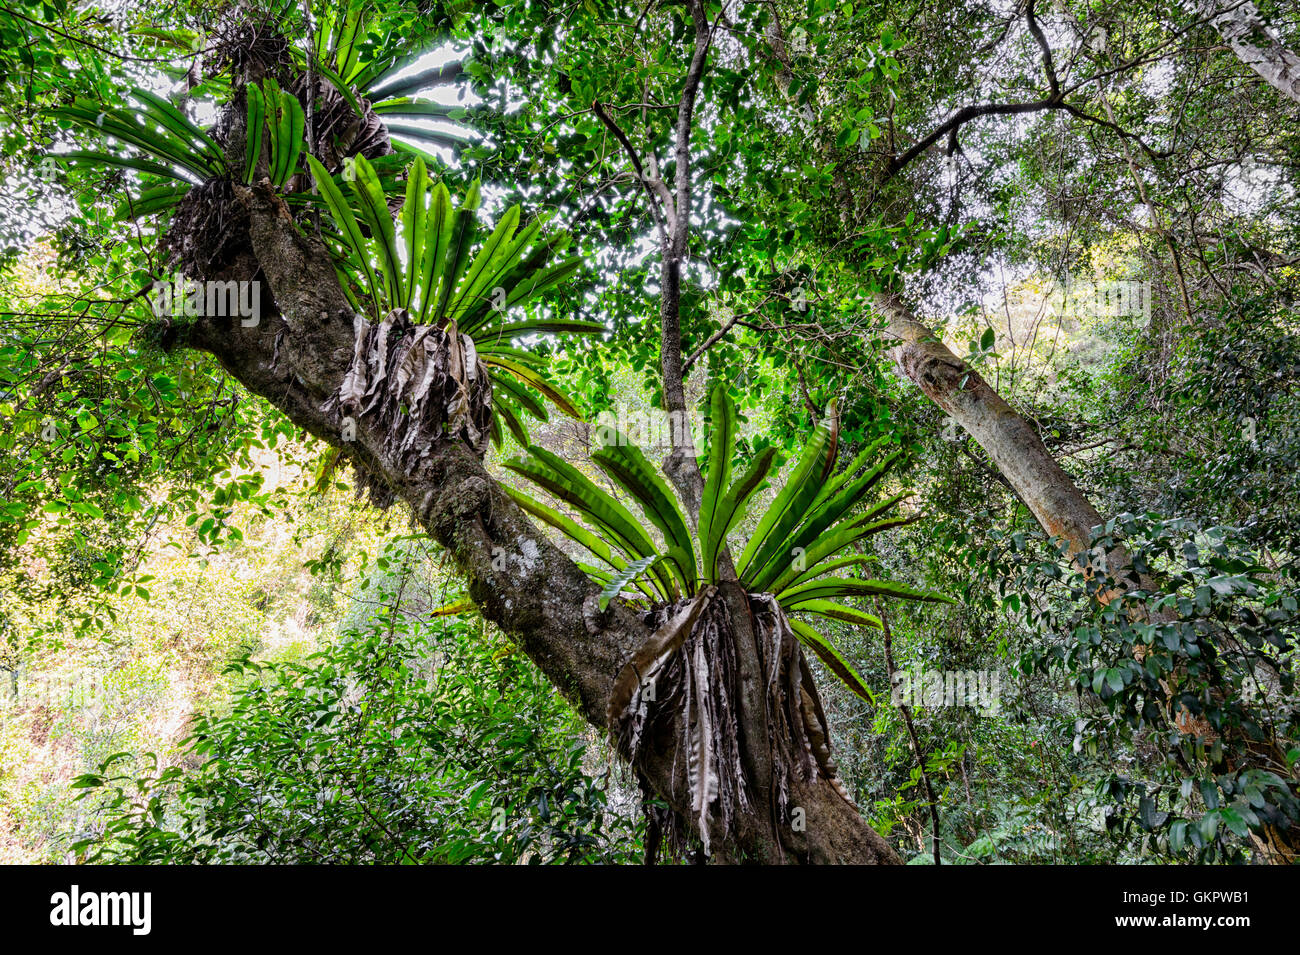 Epiphytes are parasite plants growing on trees for support, Minnamurra Rainforest Centre, New South Wales, NSW, Australia Stock Photo